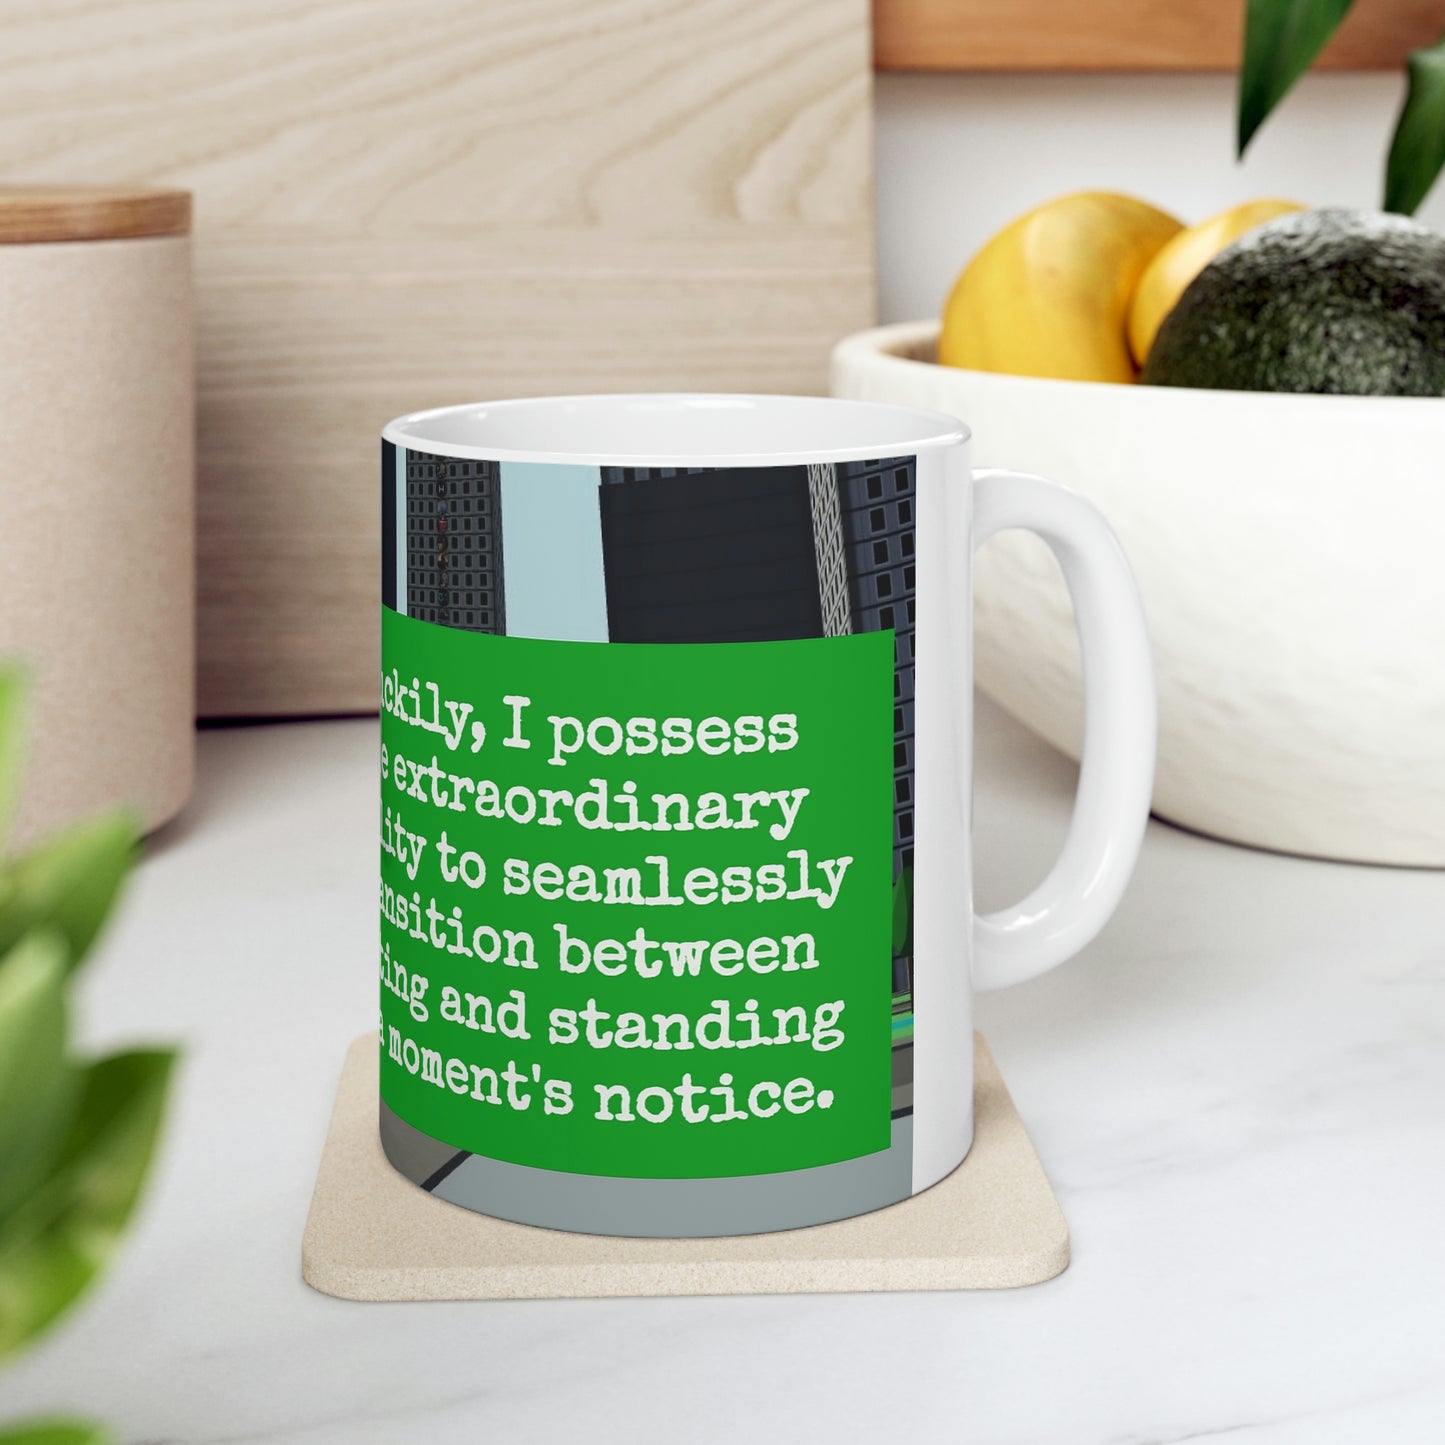 Are you Sitting Down or Standing Up? Infinvierse Entry Screen Mug